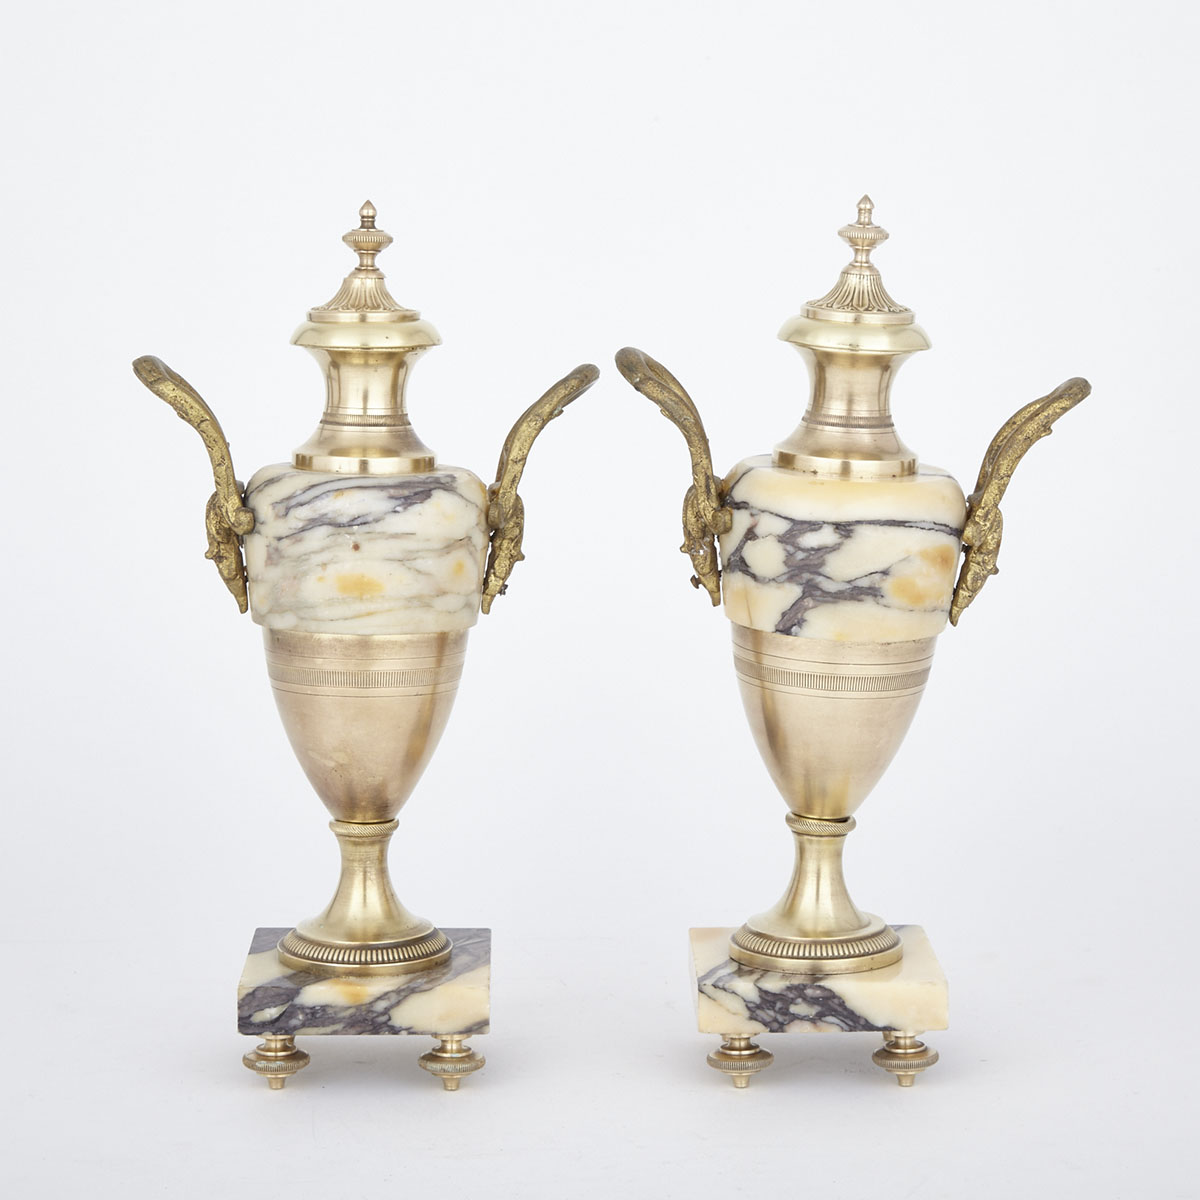 Pair of French Ormolu Mounted Urn Form Mantel Garniture, early 20th century